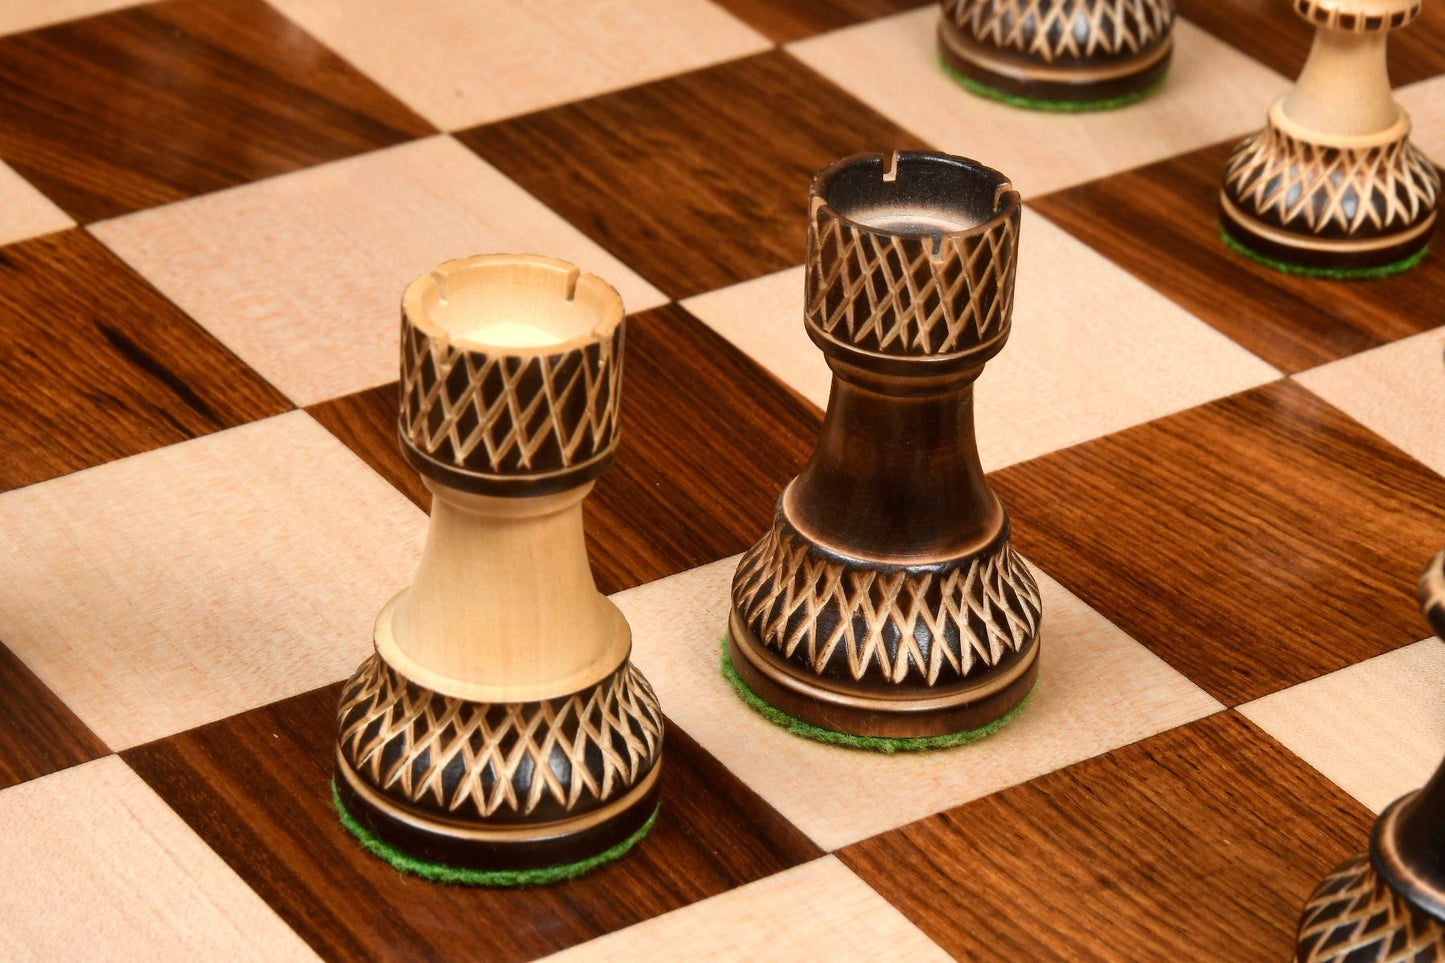 The Burnt Blazed Handcarved Pieces in Burnt Boxwood - 3.8" King with Board